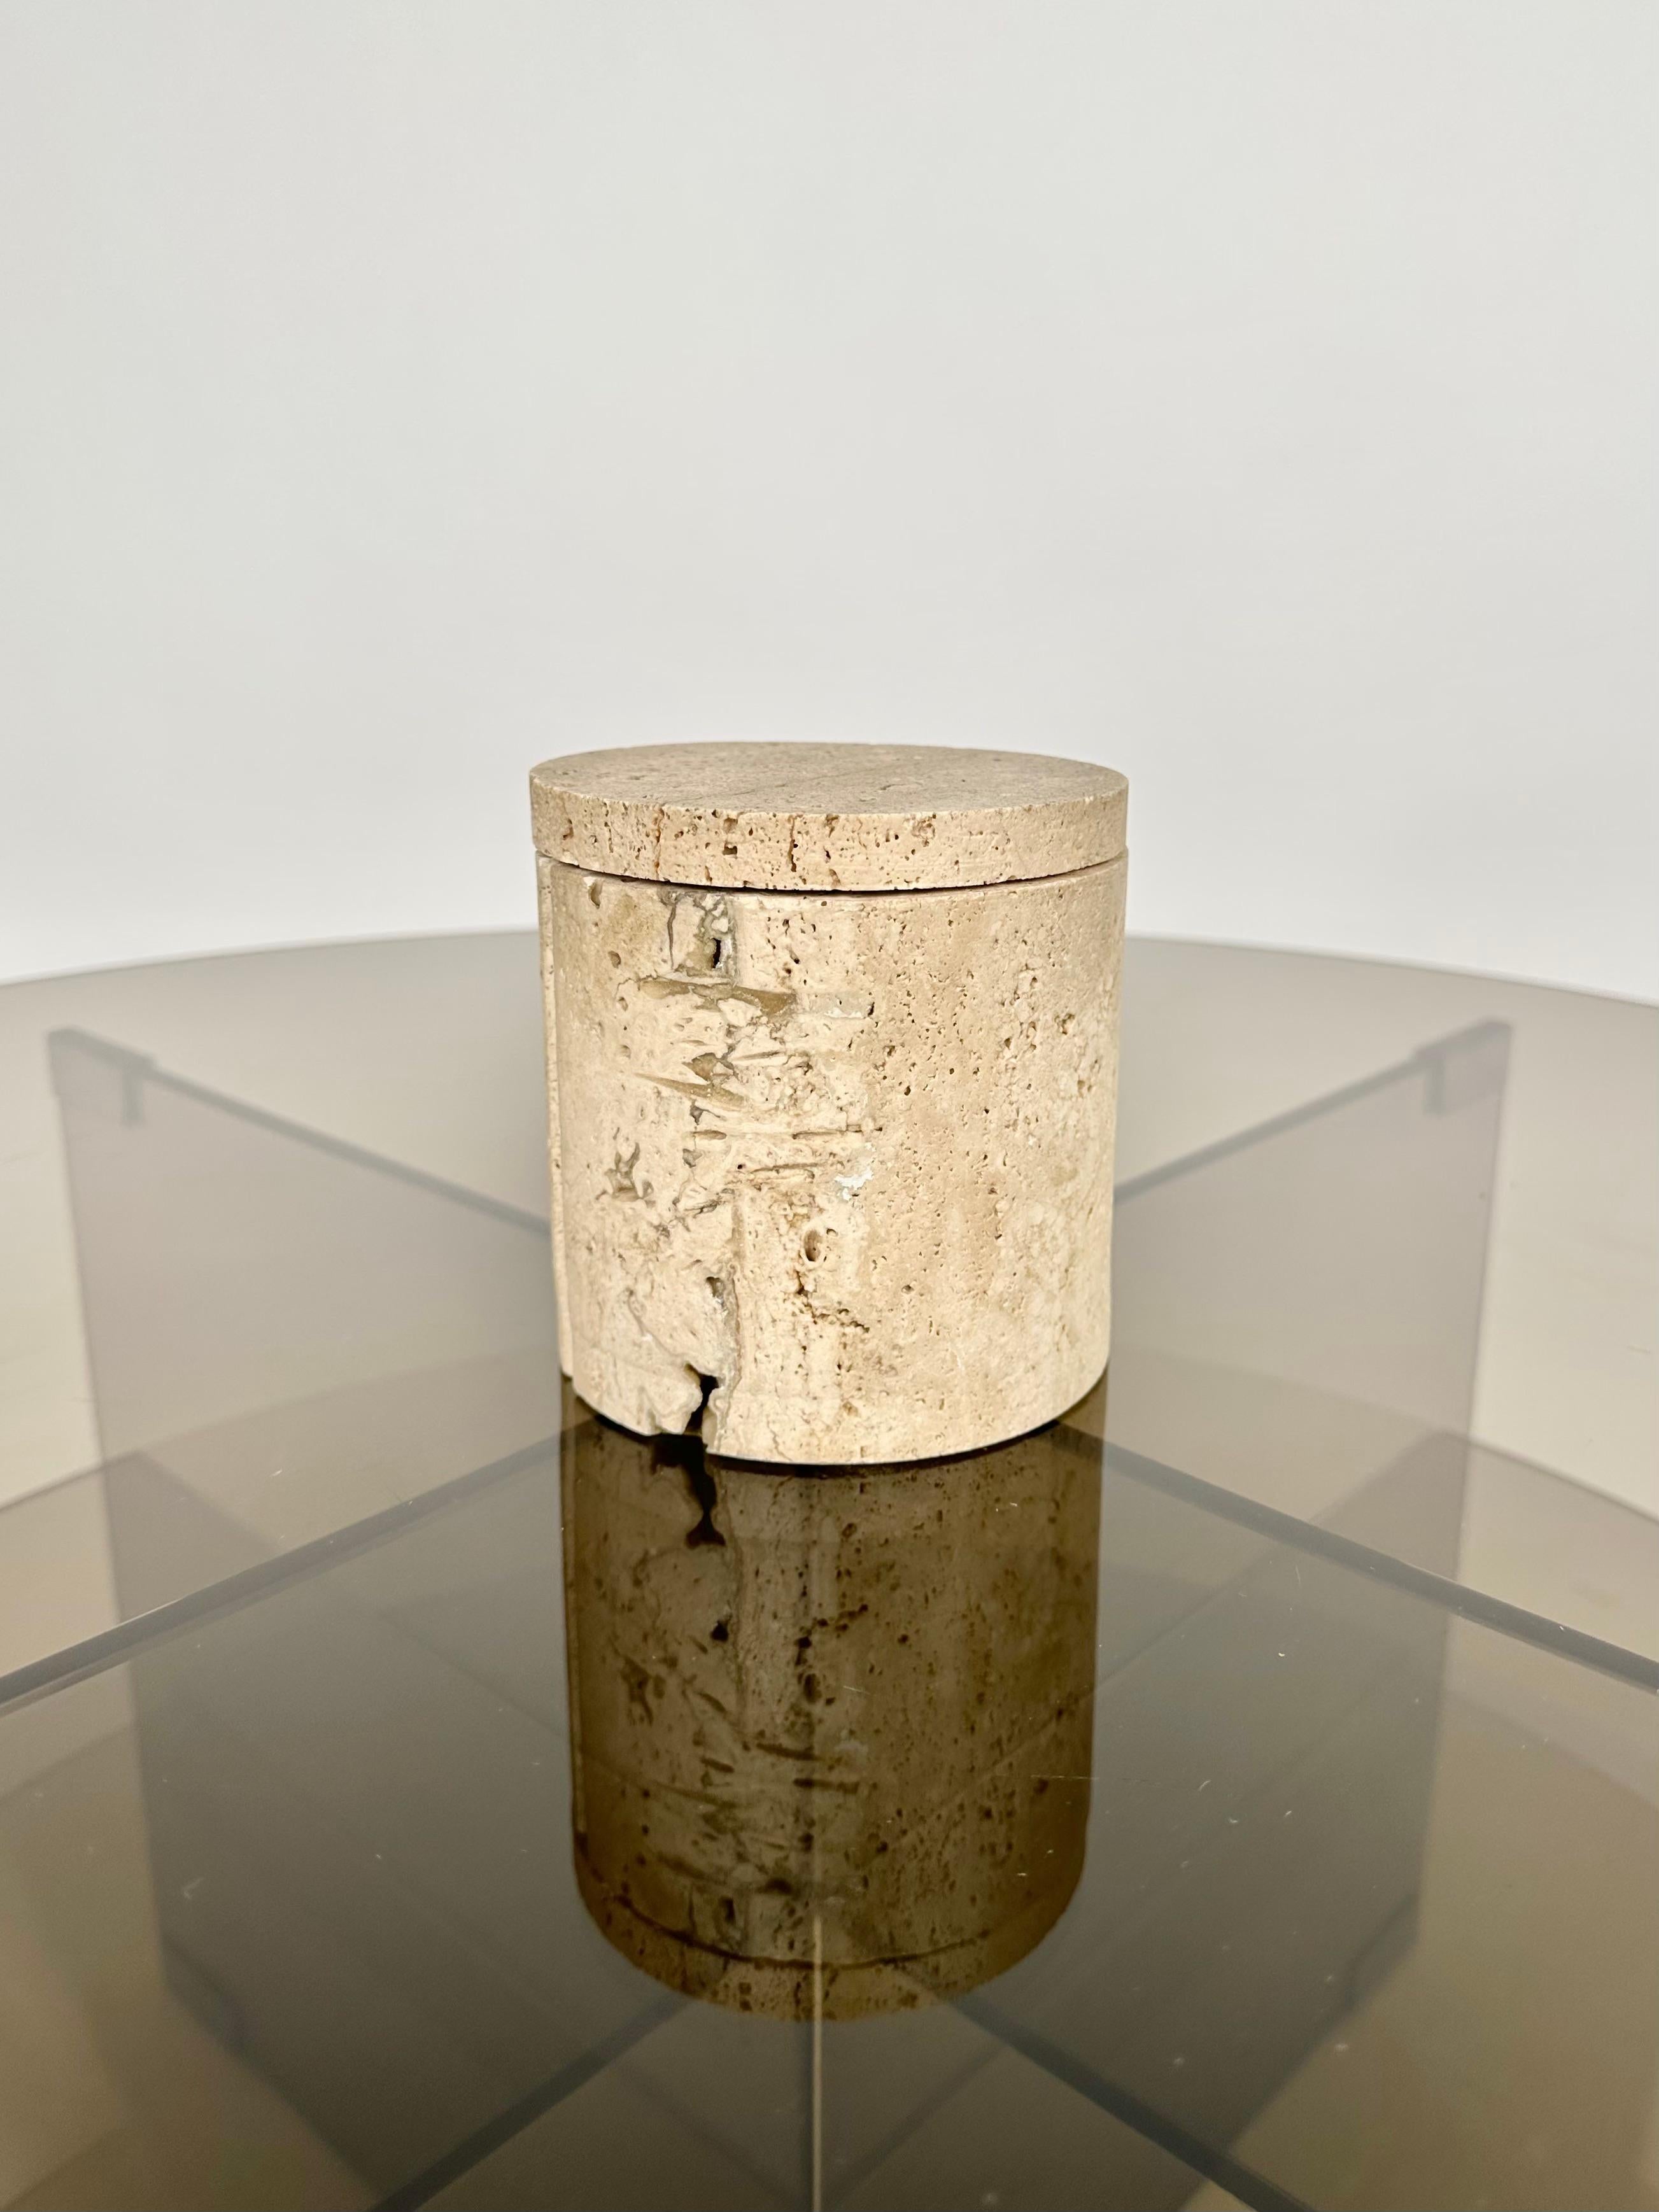 Midcentury Decorative Box in Travertine by Fratelli Mannelli, Italy, 1970s For Sale 2